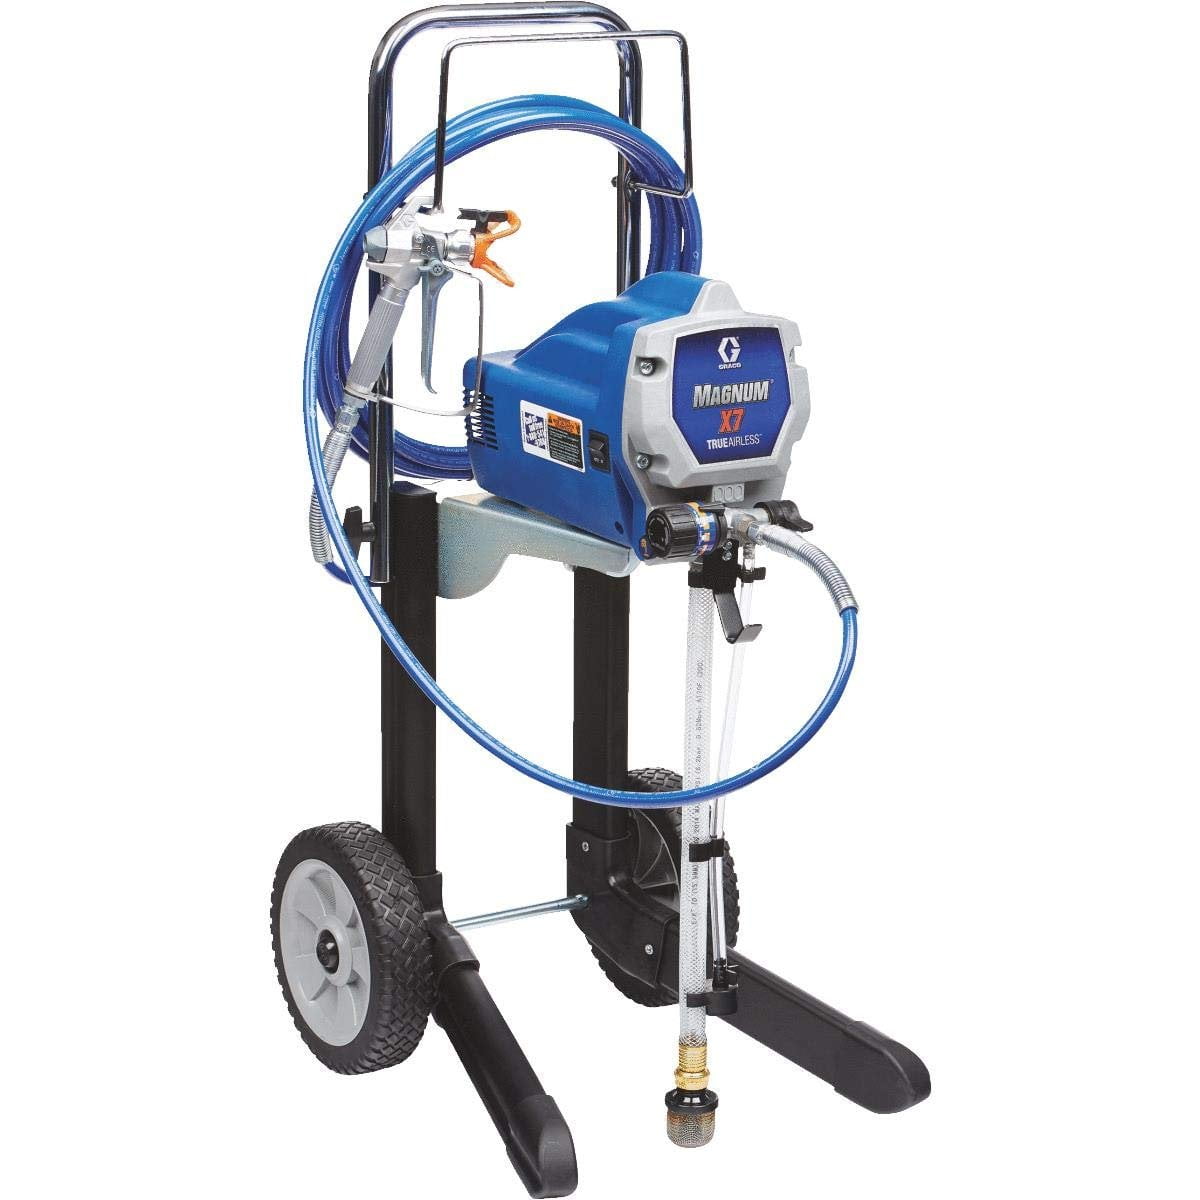 graco-contractor-pc-airless-spray-gun-2-4-finger-17y043-airless